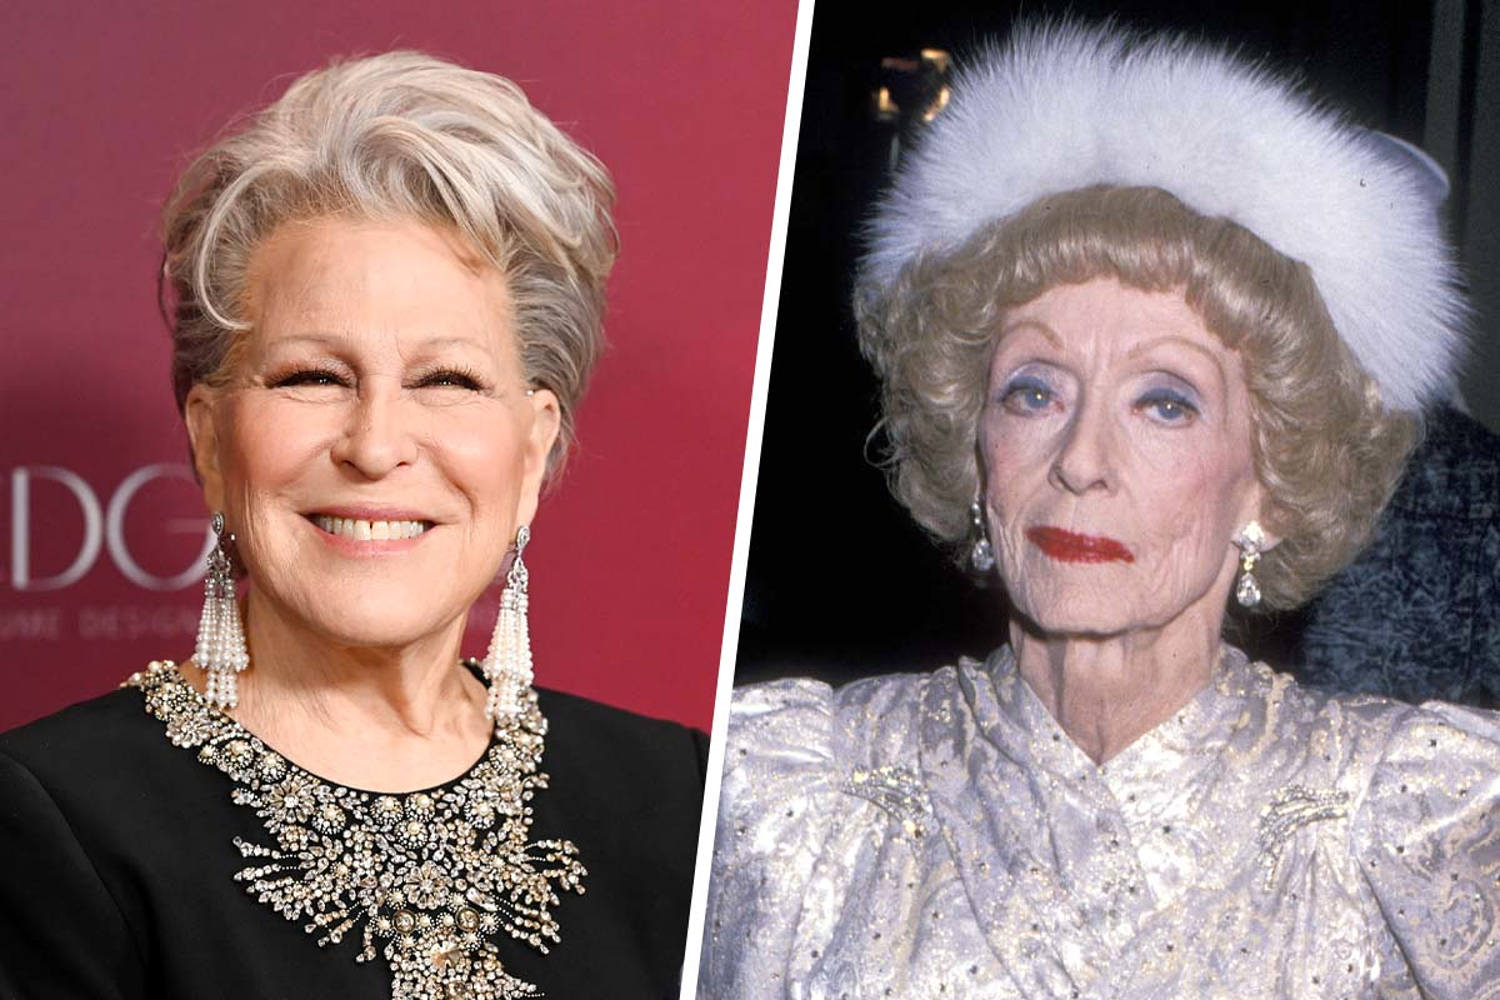 Bette Midler says Bette Davis was ‘not pleased’ after learning she was named after her 